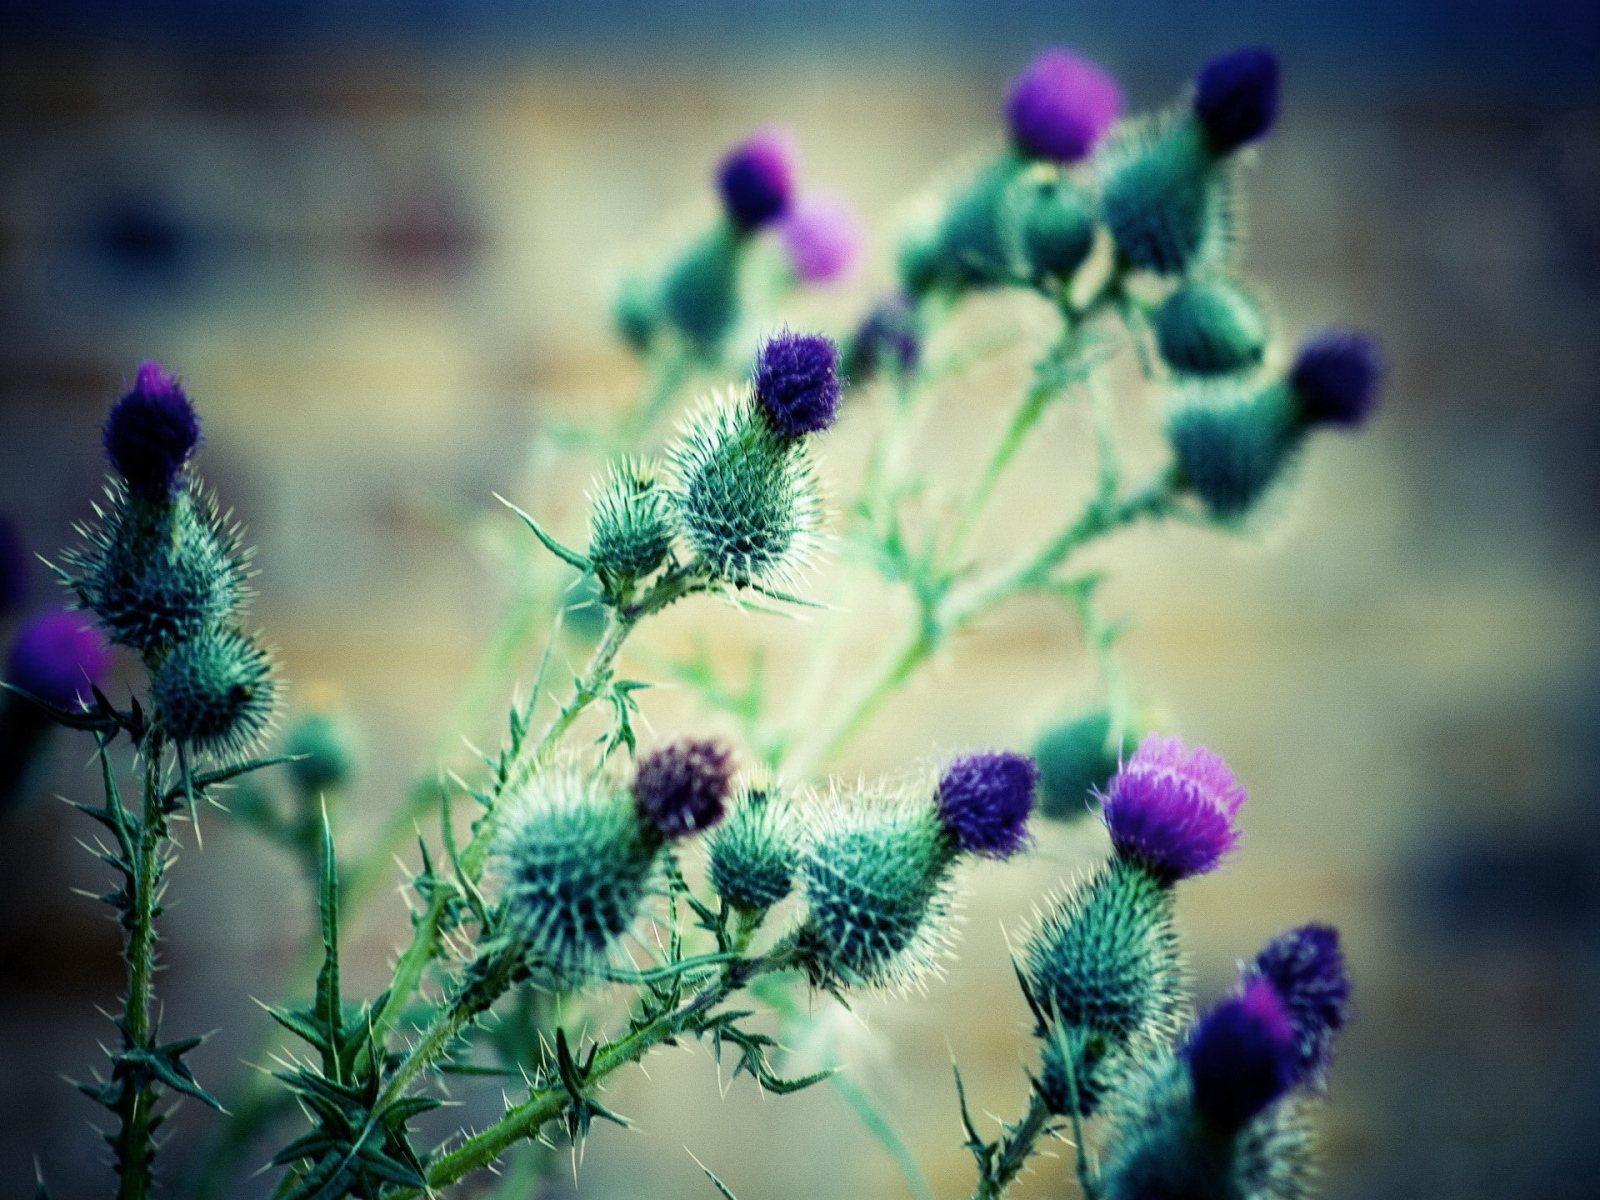 The flowers of thistles